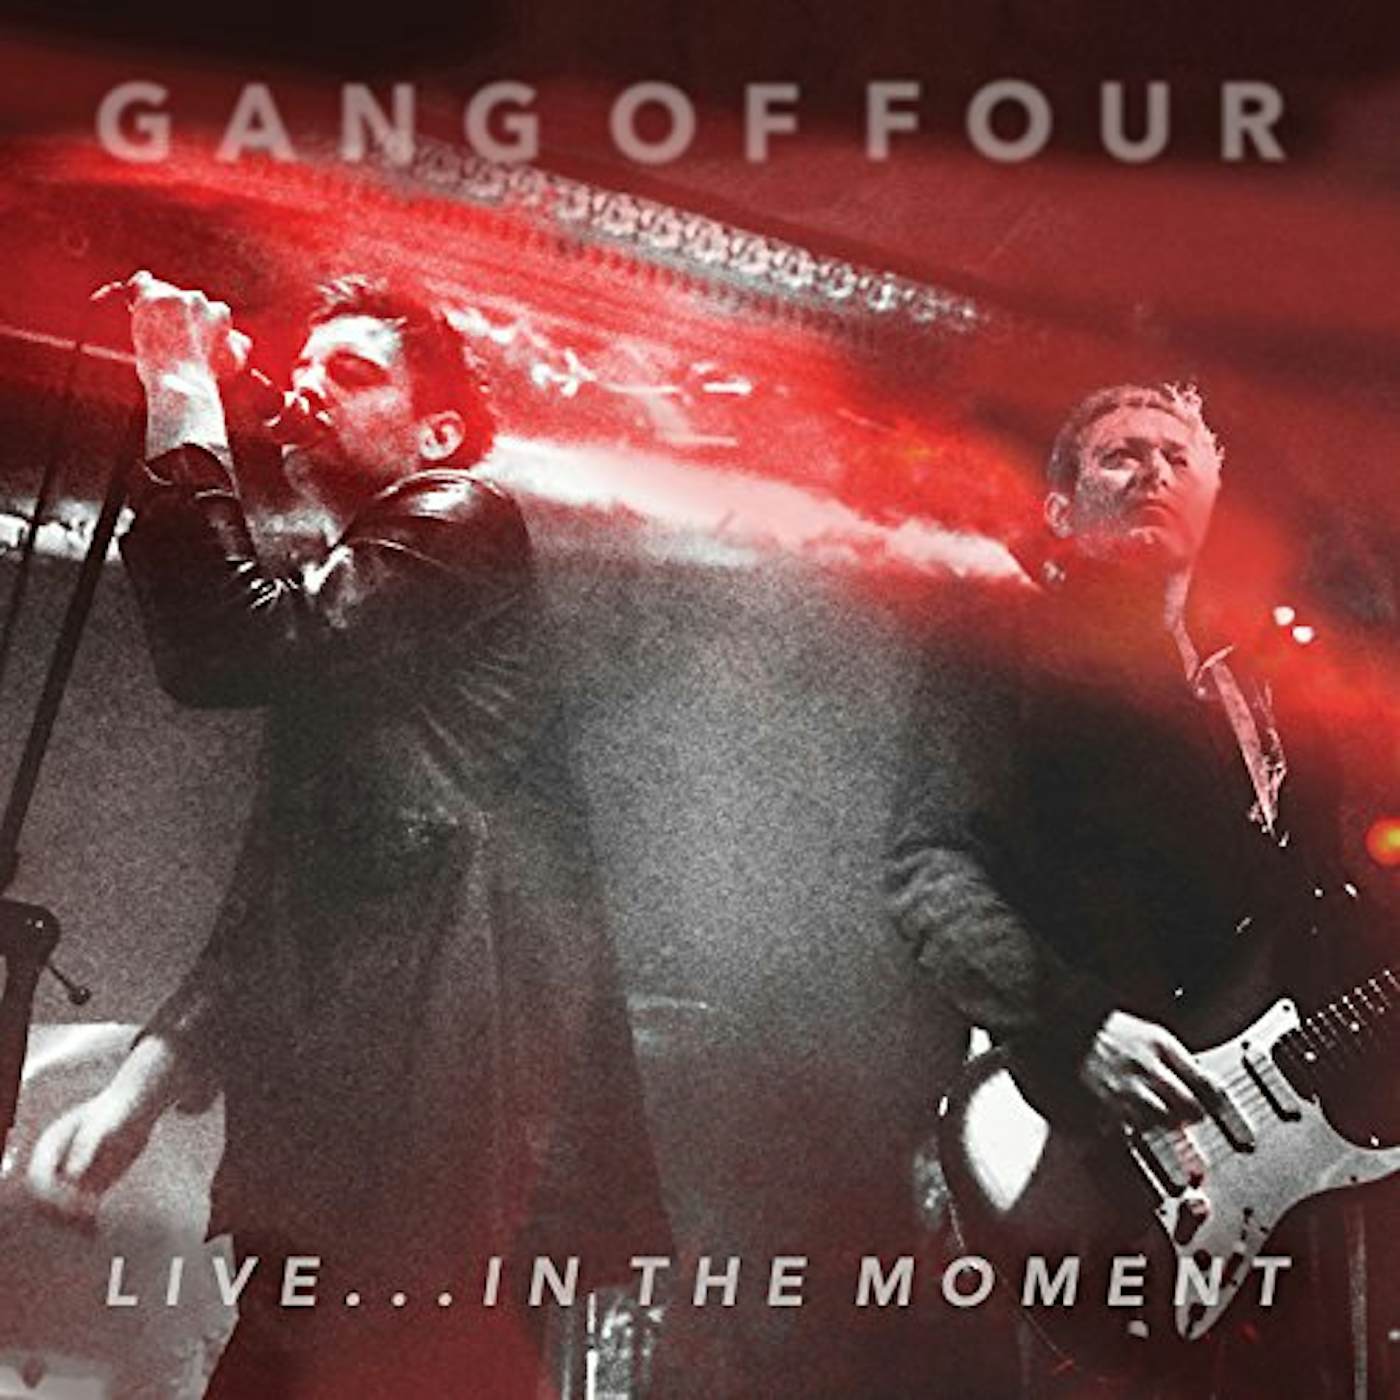 Gang Of Four LIVE IN THE MOMENT Vinyl Record